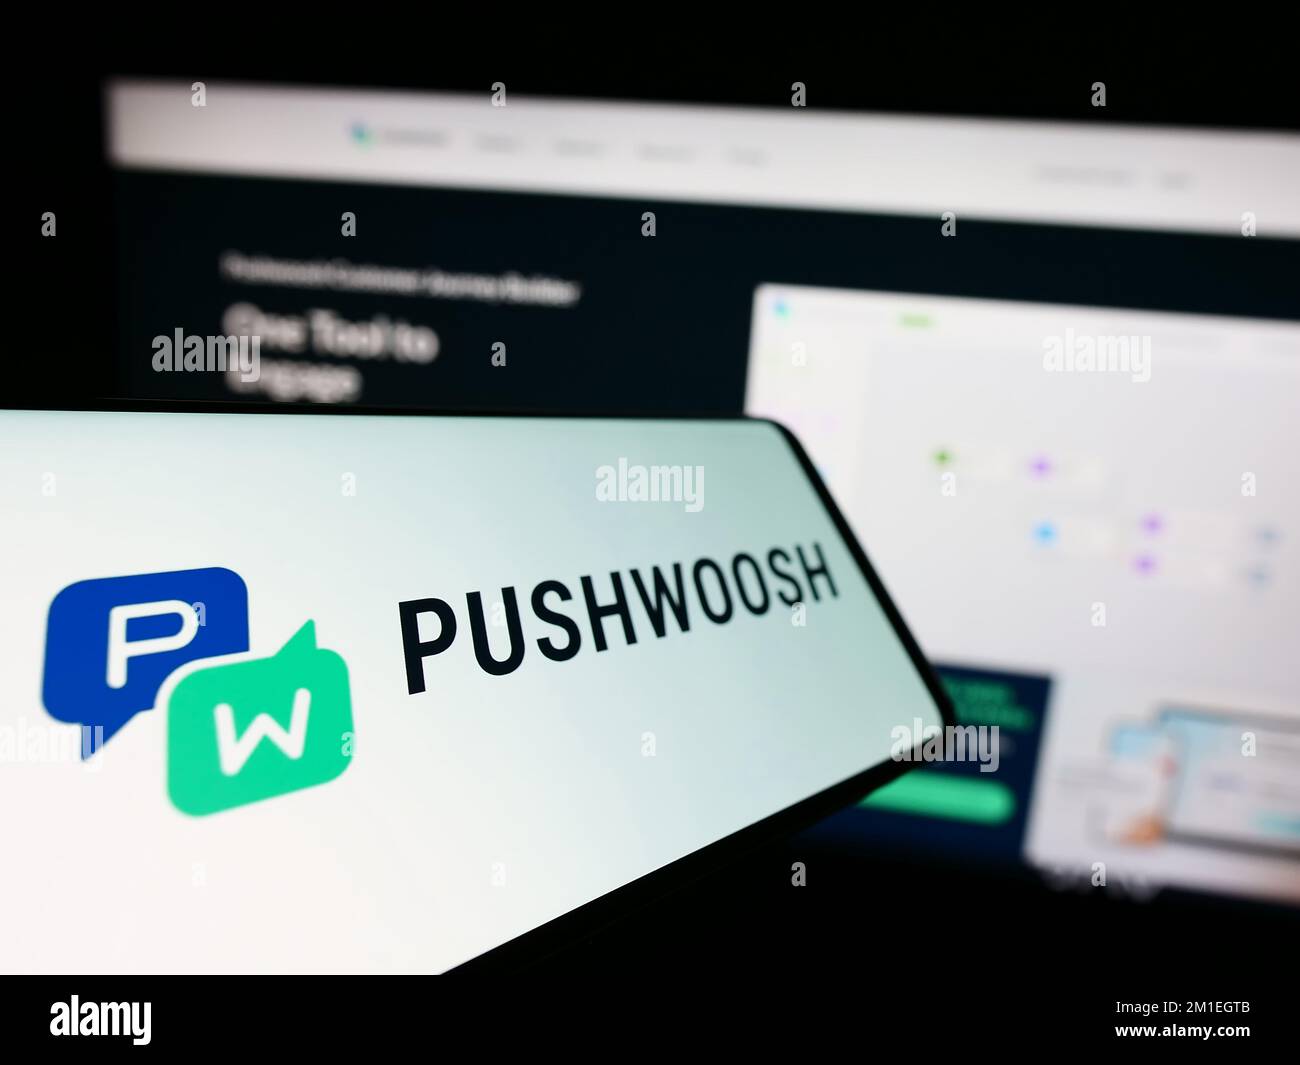 Mobile phone with logo of American marketing platform company Pushwoosh Inc. on screen in front of website. Focus on left of phone display. Stock Photo